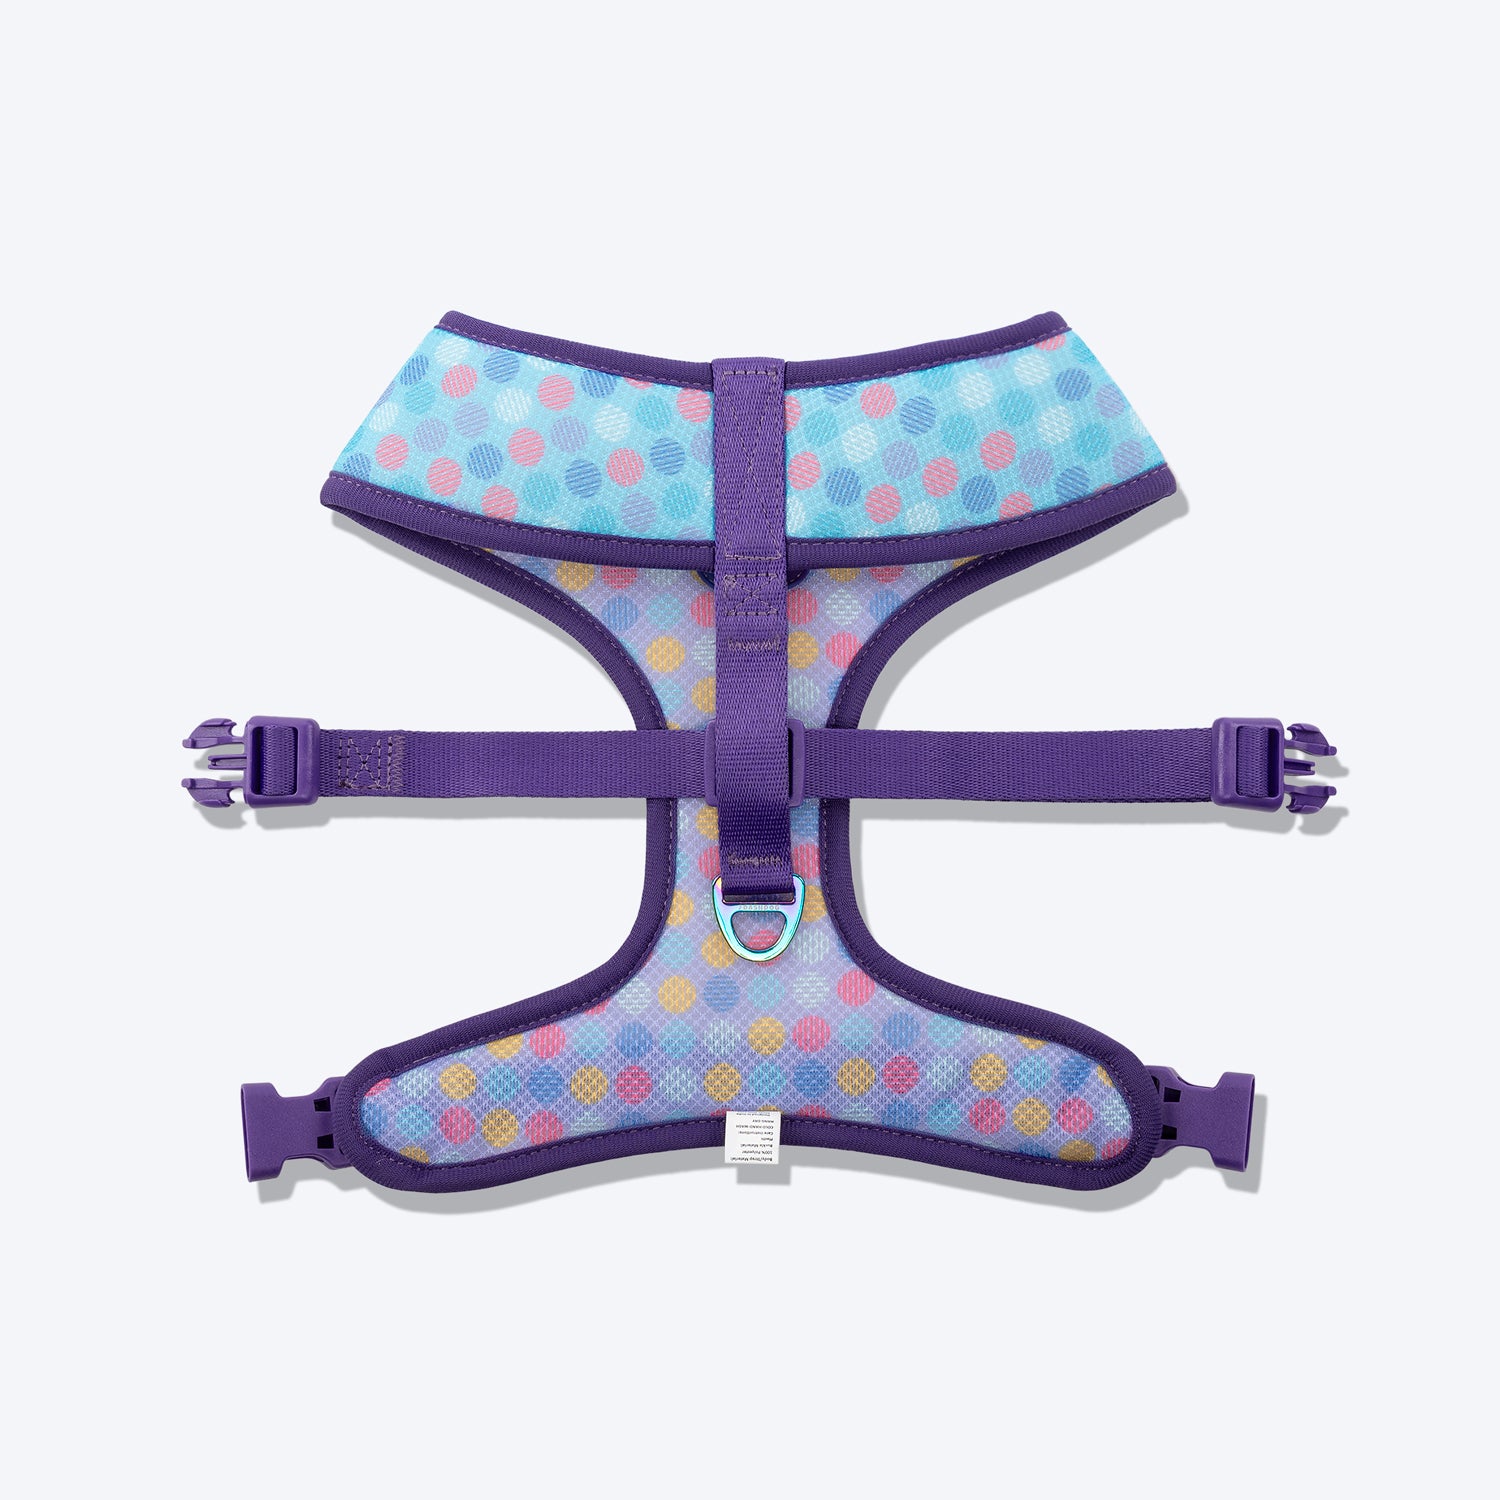 Dash Dog Circle Double Harness - Aqua Blue & Lavender - Heads Up For Tails